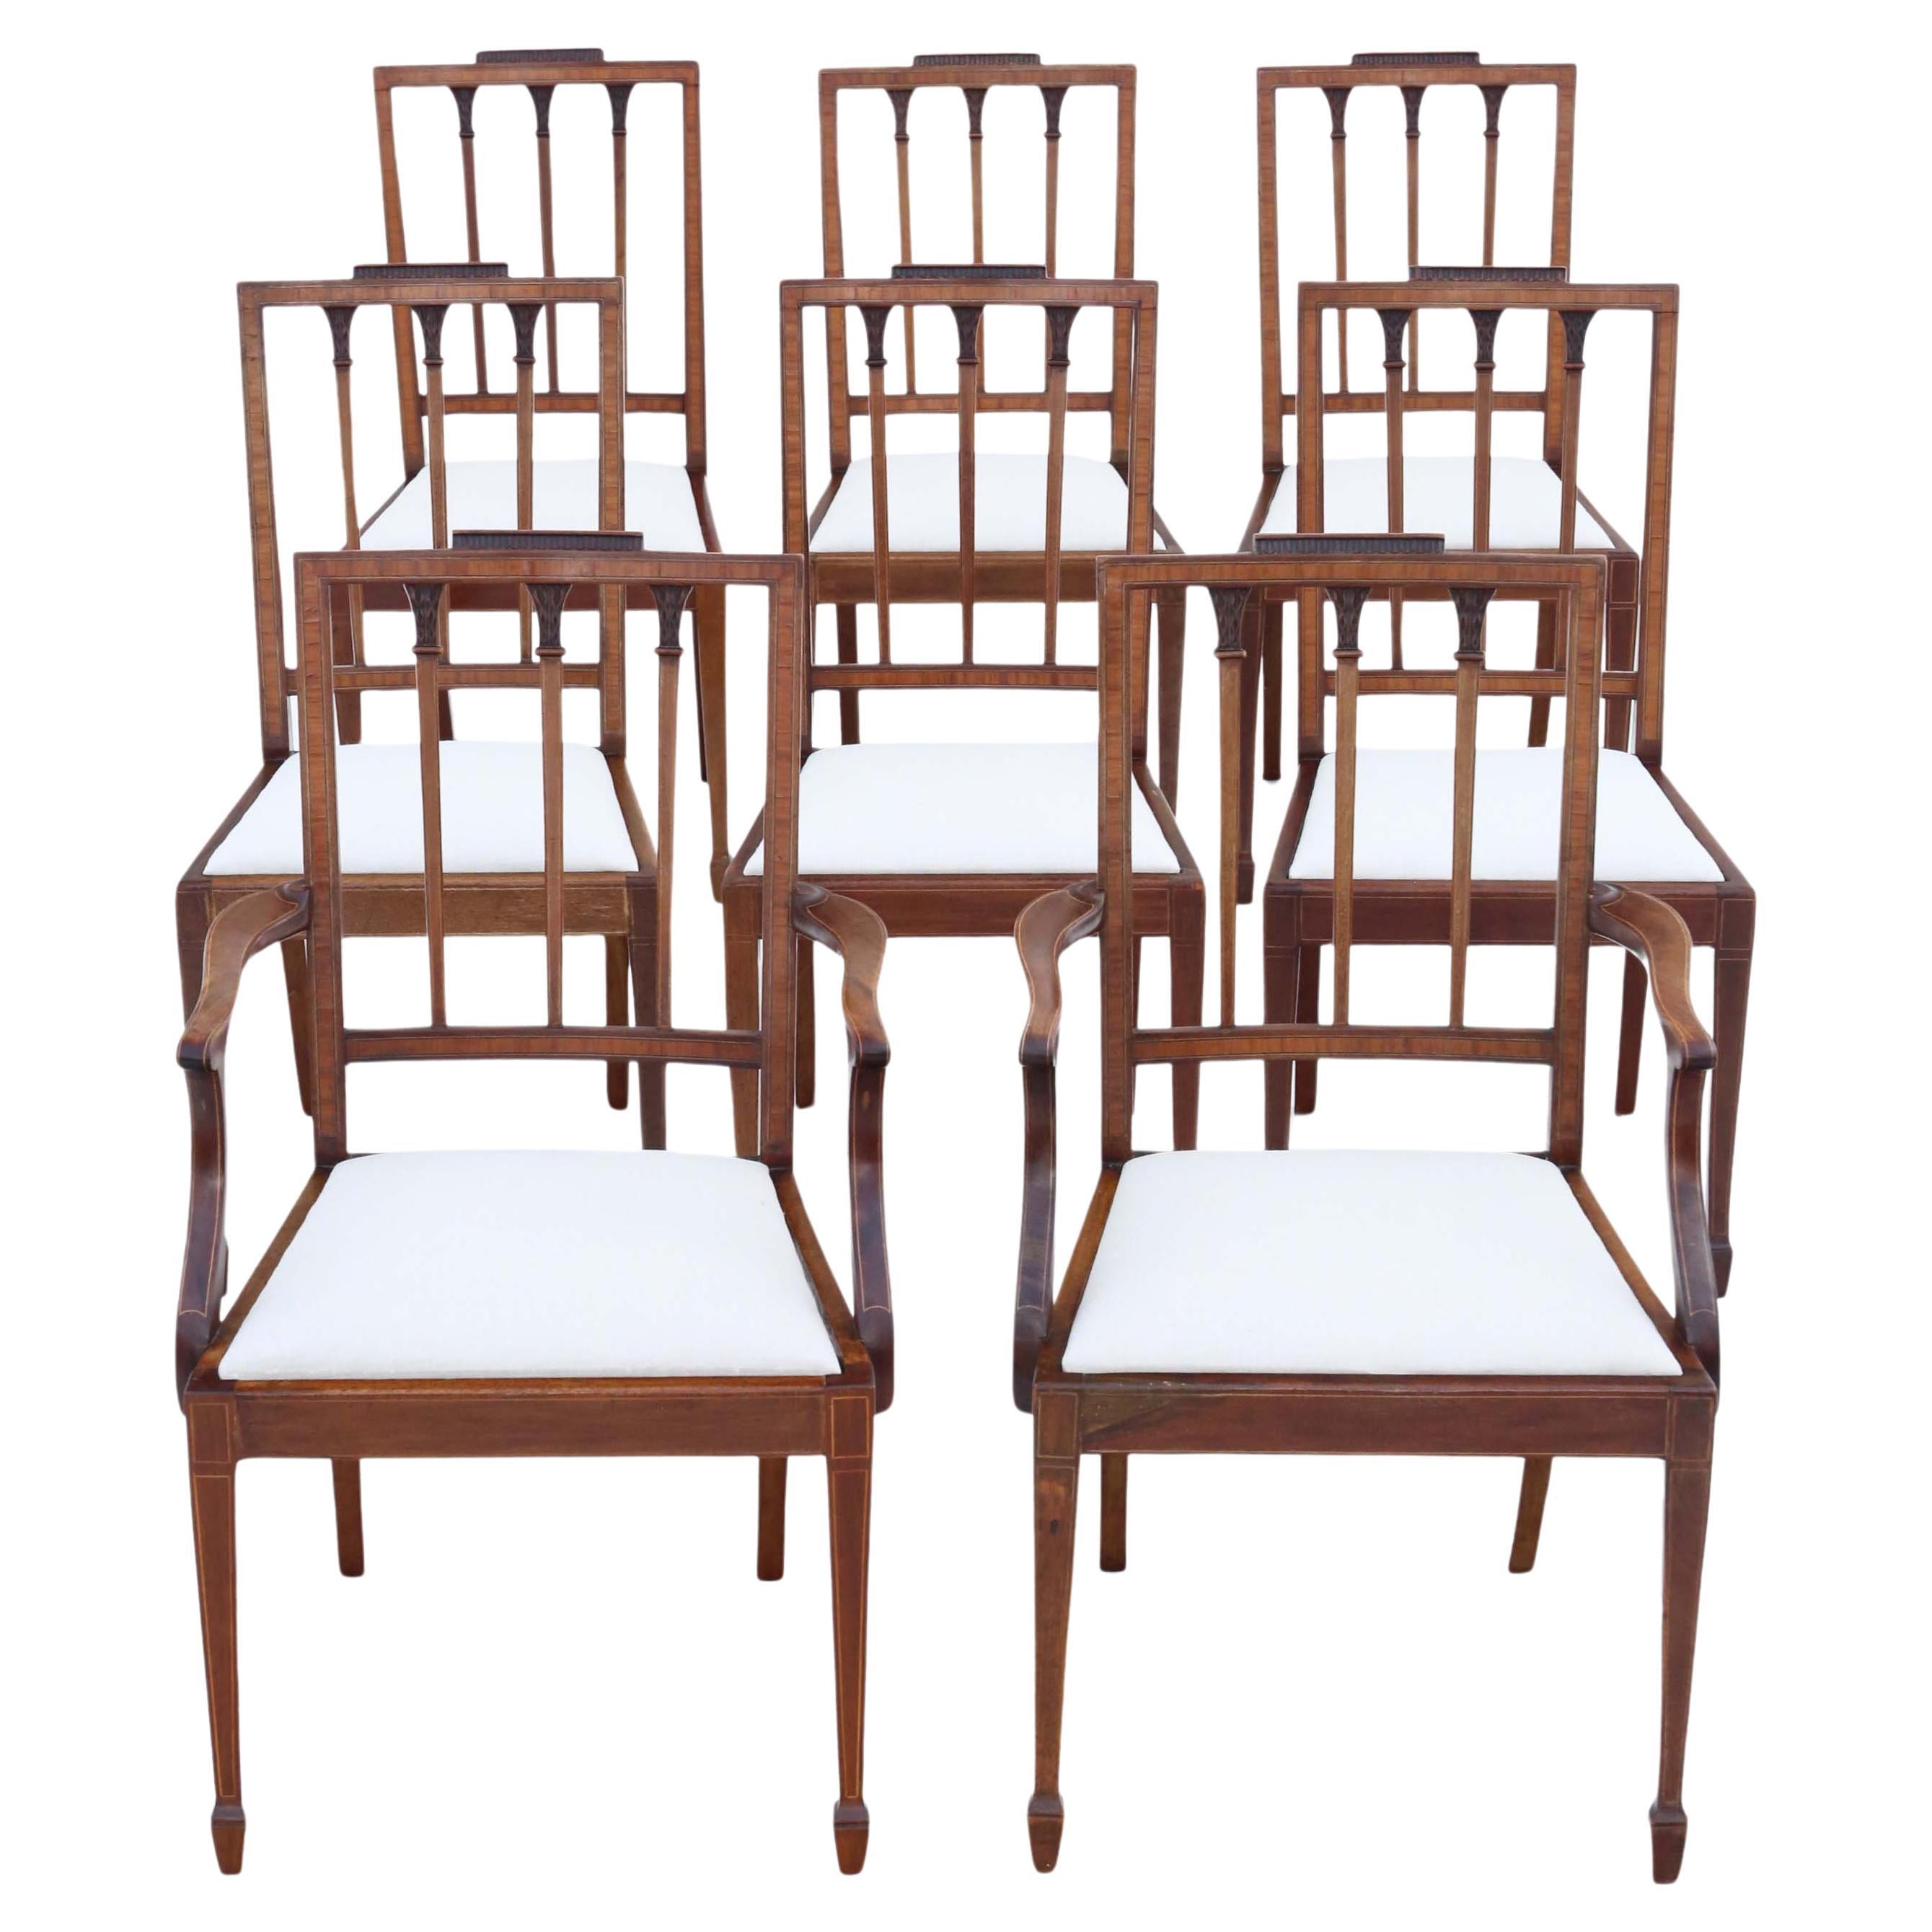 Georgian Revival Mahogany Dining Chairs: Set of 8 (6 + 2), Antique Quality, C190 For Sale